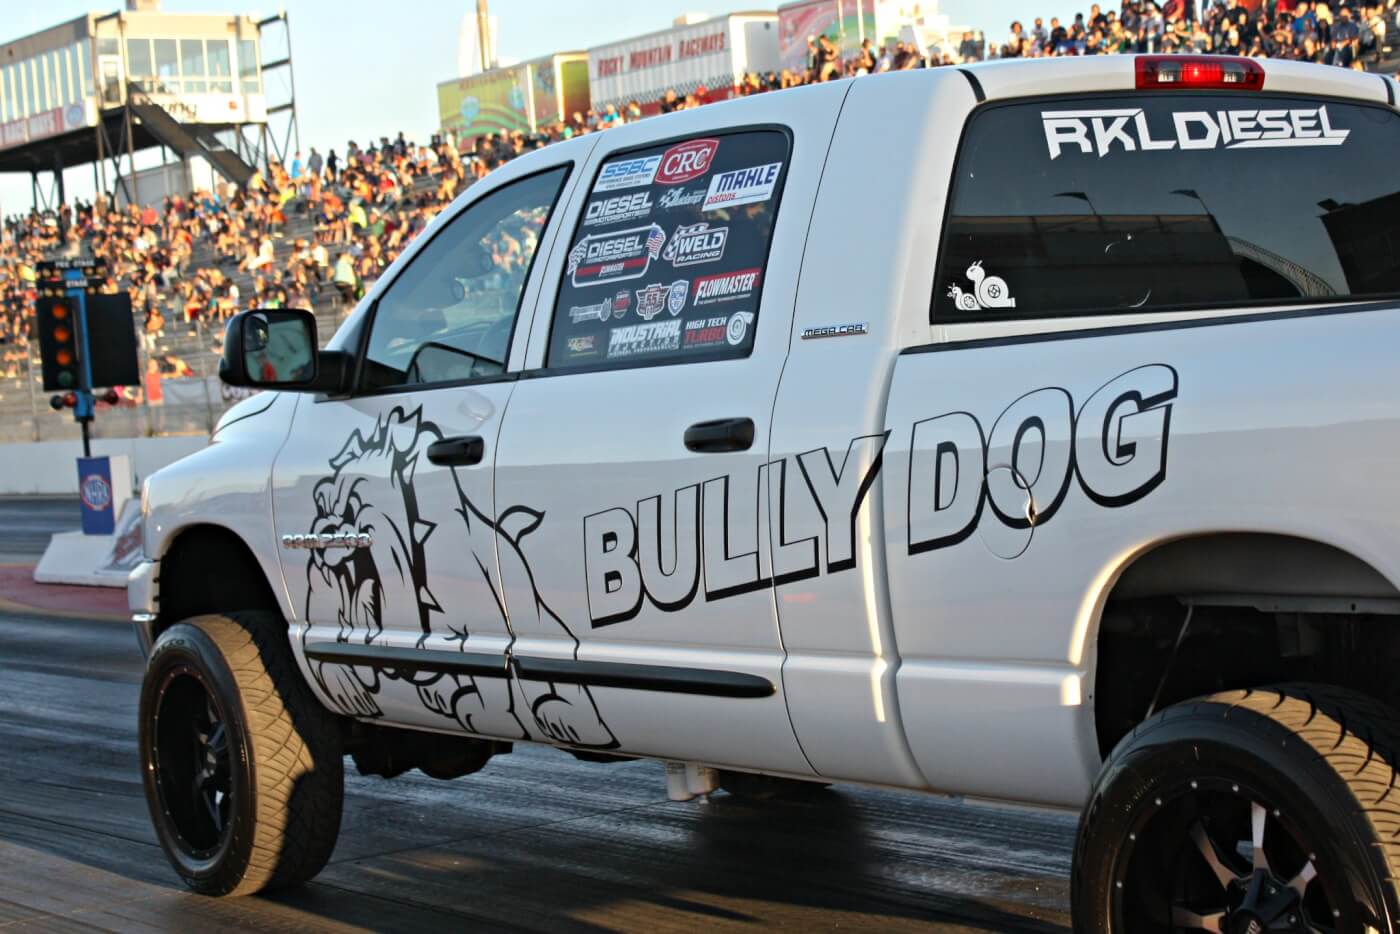 Lyle Richmond, an employee at nearby Bully Dog, had his 5.9L Cummins Mega Cab out racing and made it into the final round of Quick Diesel against Verlon Southwick, only to have a broken flexplate end the race sooner than he’d hoped.